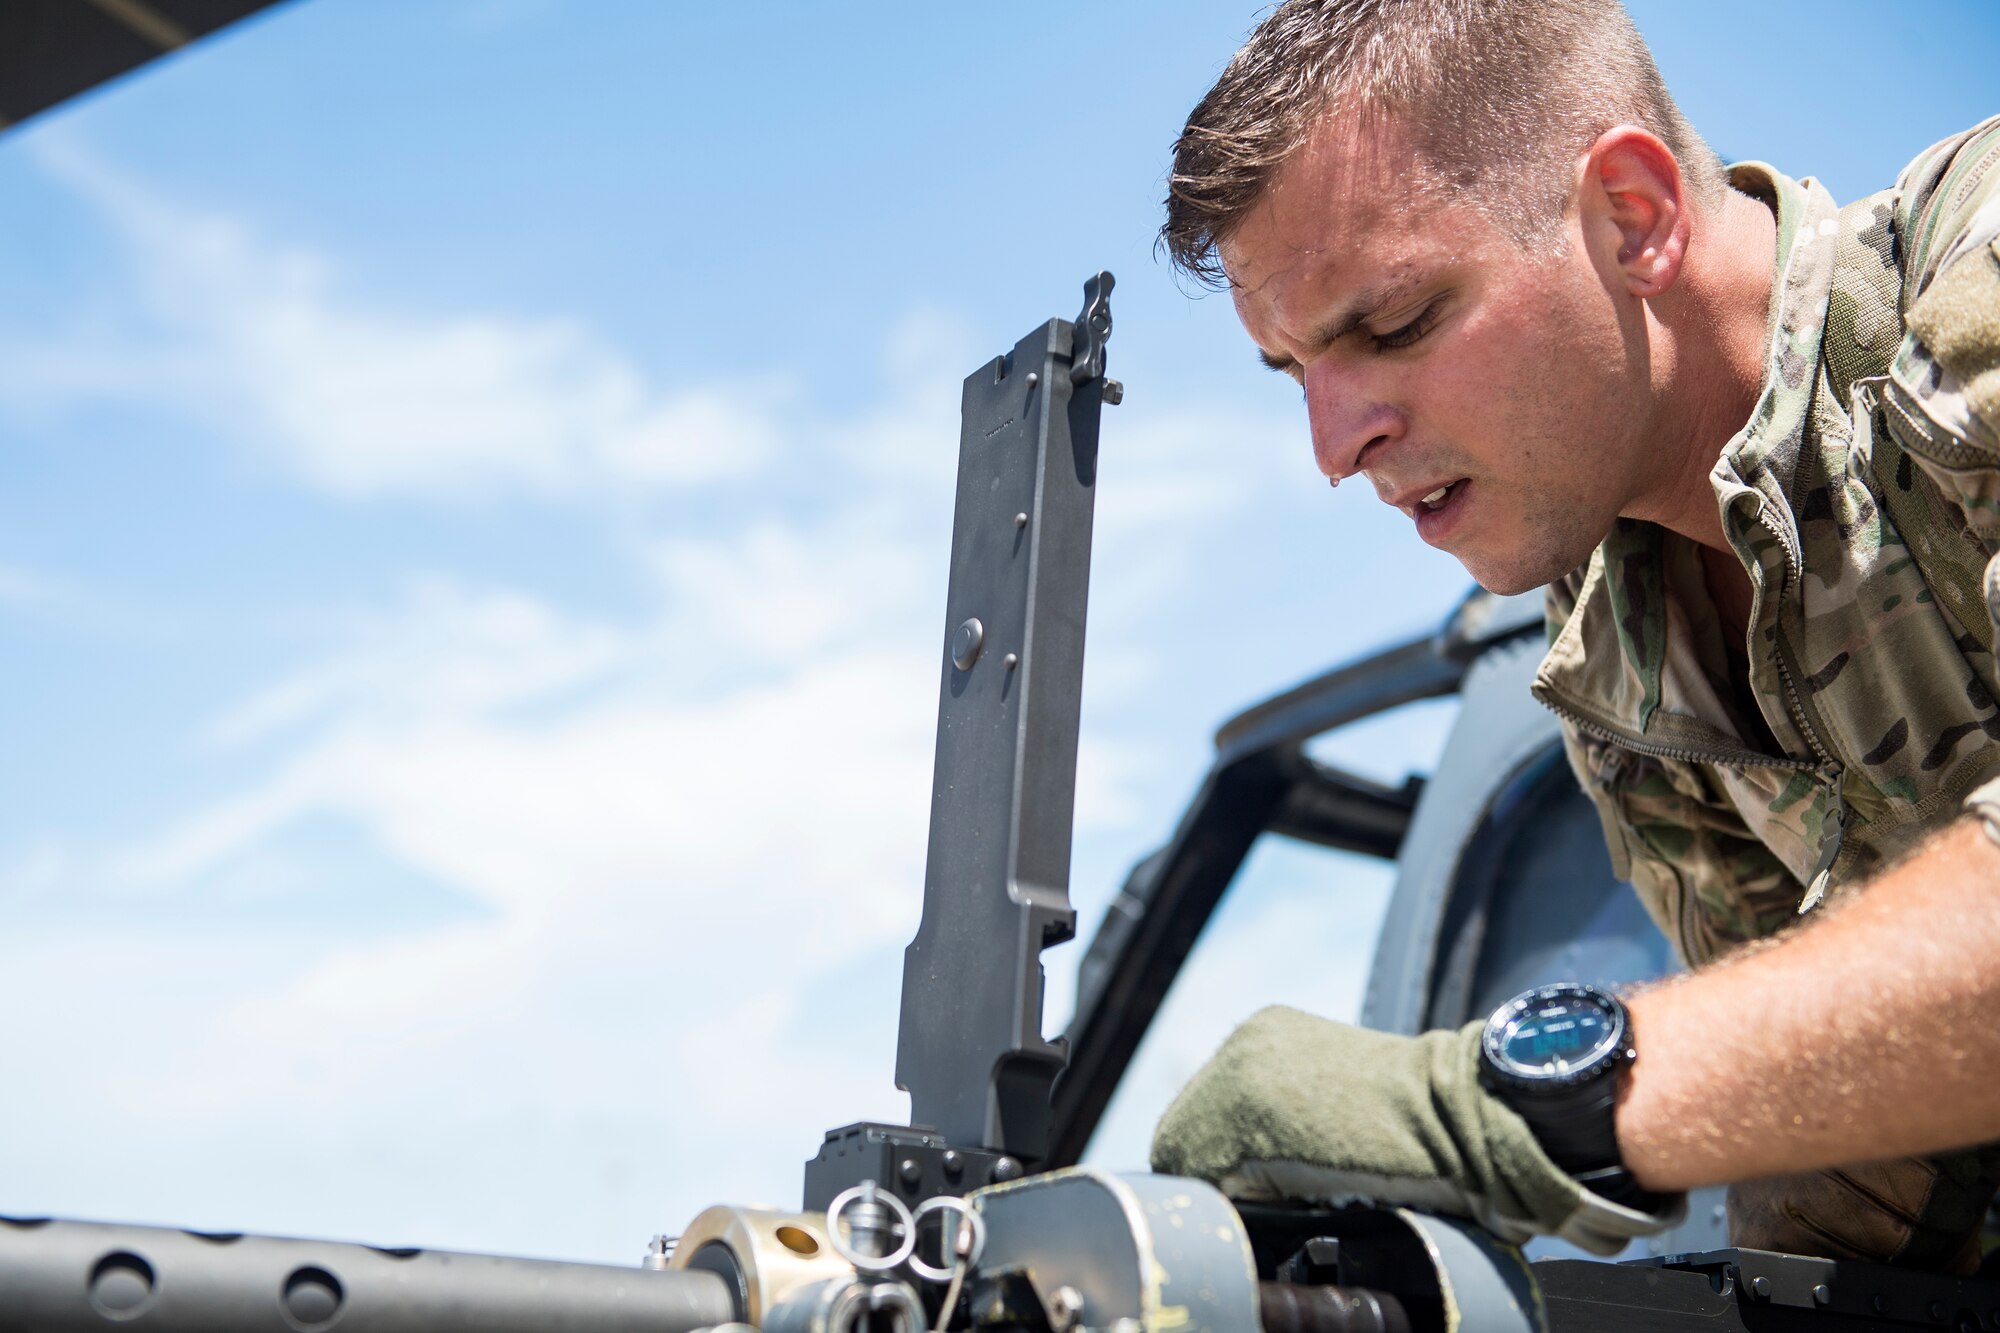 Staff Sgt. Daniel Paige, 41st Rescue Squadron (RQS) special missions aviator, inspects an M2 machine gun prior to a mission, Aug. 16, 2018, at Patrick Air Force Base (AFB), Fla. Airmen from the 41st RQS and 41st Helicopter Maintenance Unit traveled to Patrick AFB to participate in a spin-up exercise. During the exercise, Airmen faced scenarios and situations they may encounter downrange. (U.S. Air Force photo by Senior Airman Janiqua P. Robinson)